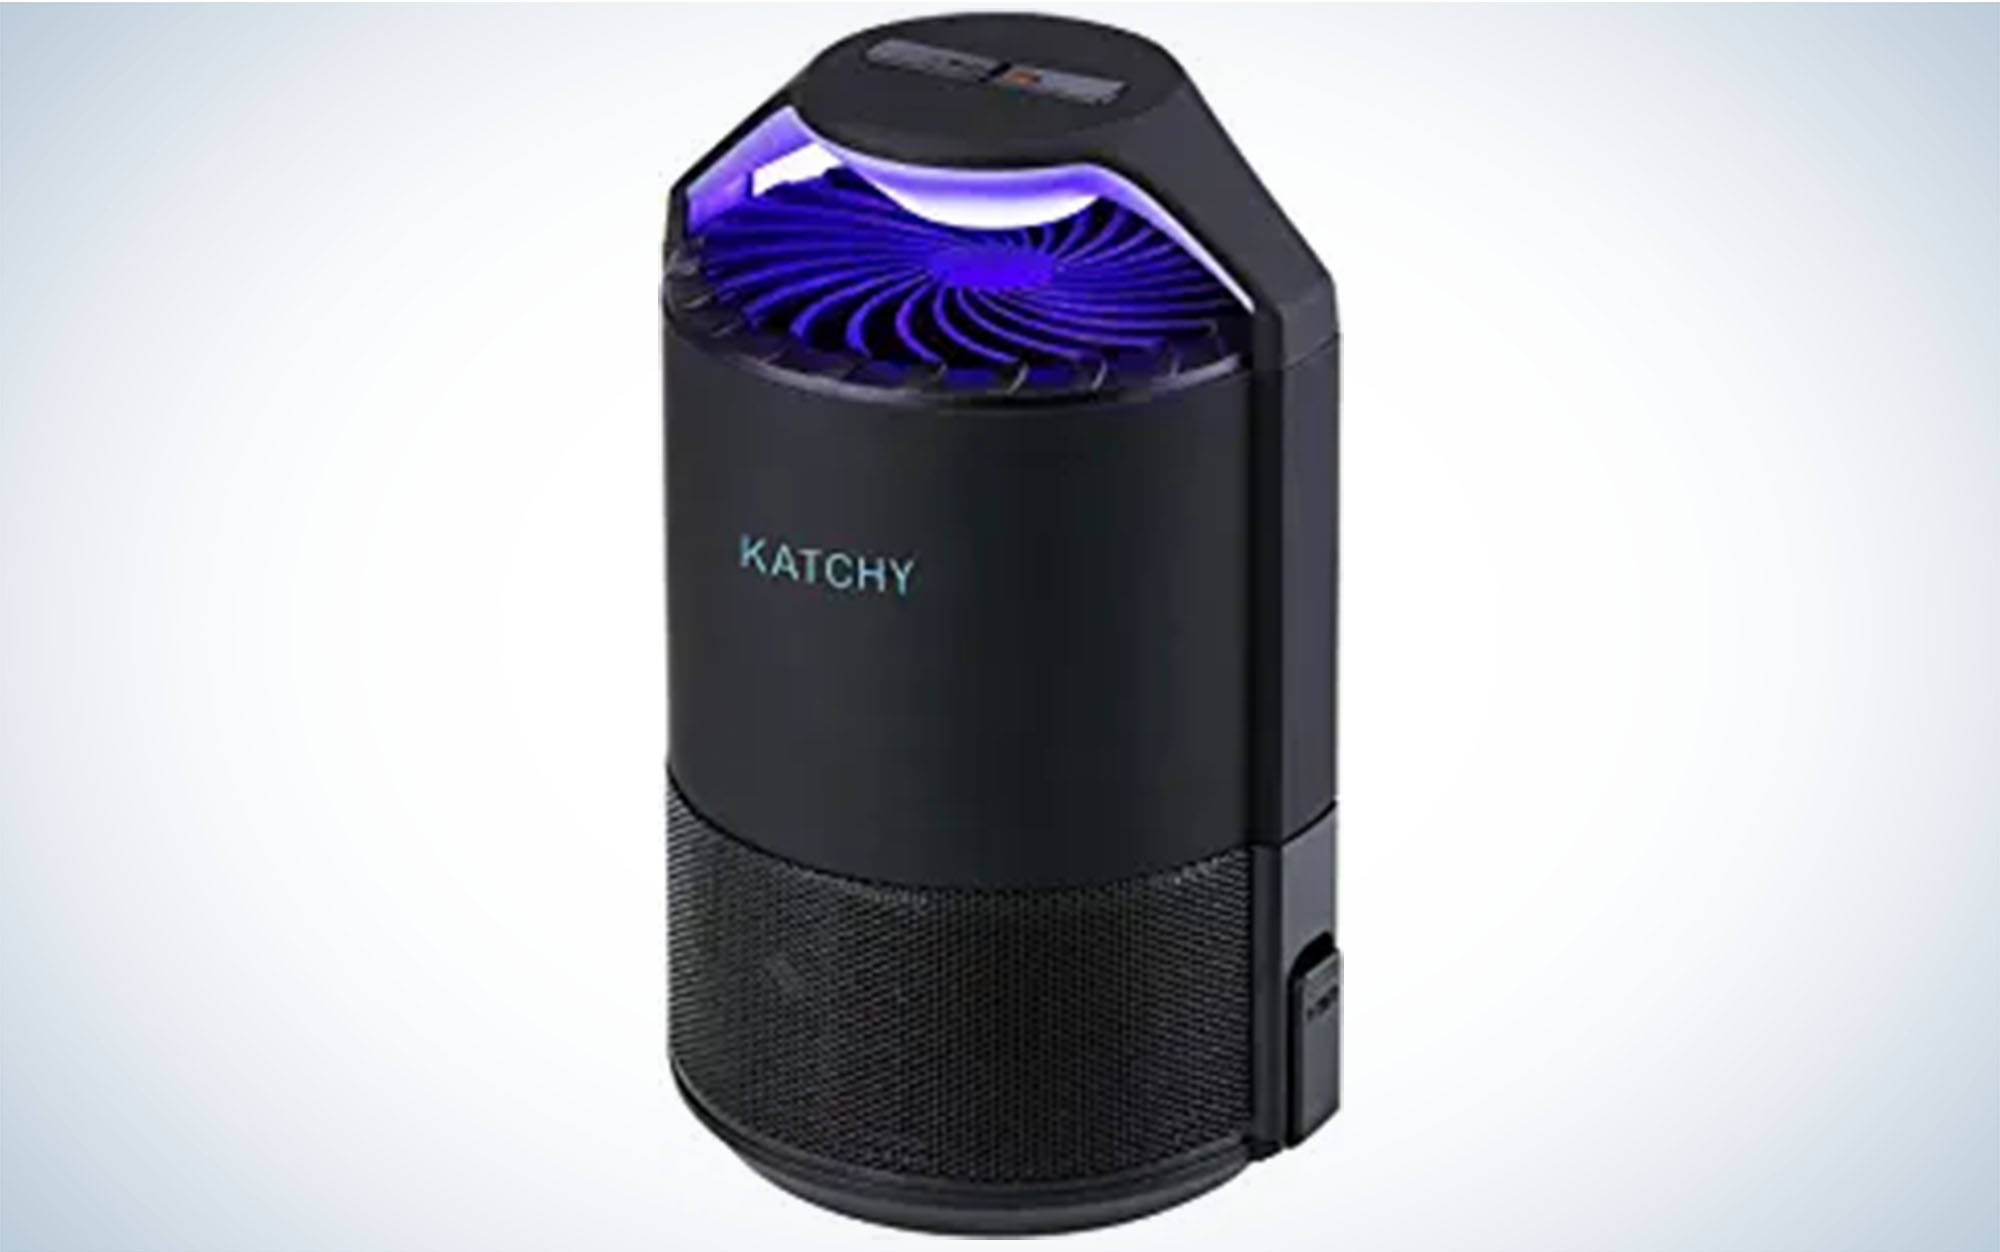 We tested the Katchy Indoor Insect Trap.